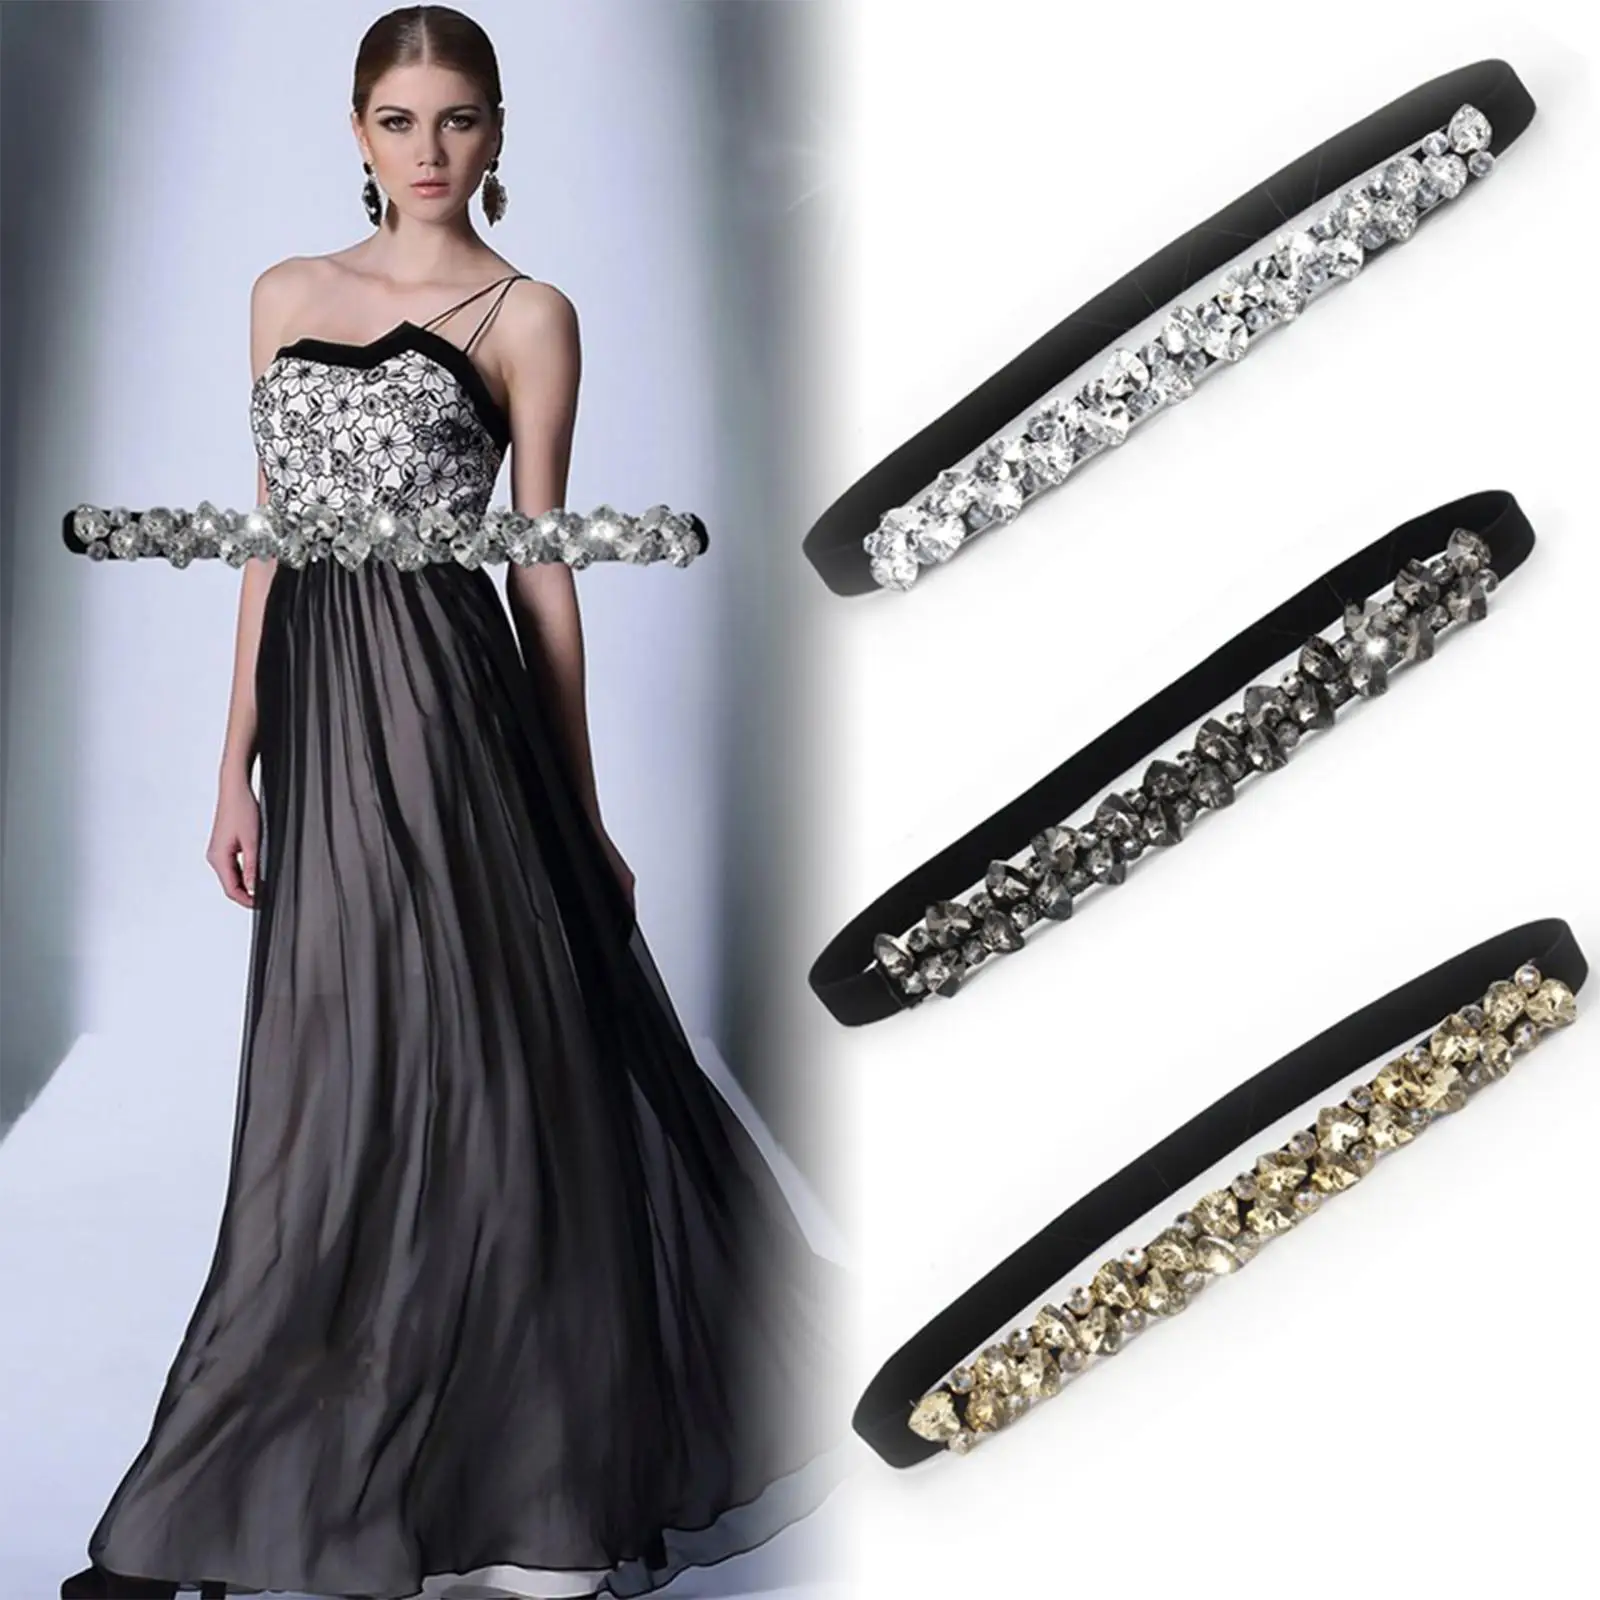 Waistband with Rhinestones Fashion Bridesmaids Sash Waist for Wedding Graduations Cocktail Parties Formal Occasions Ladies